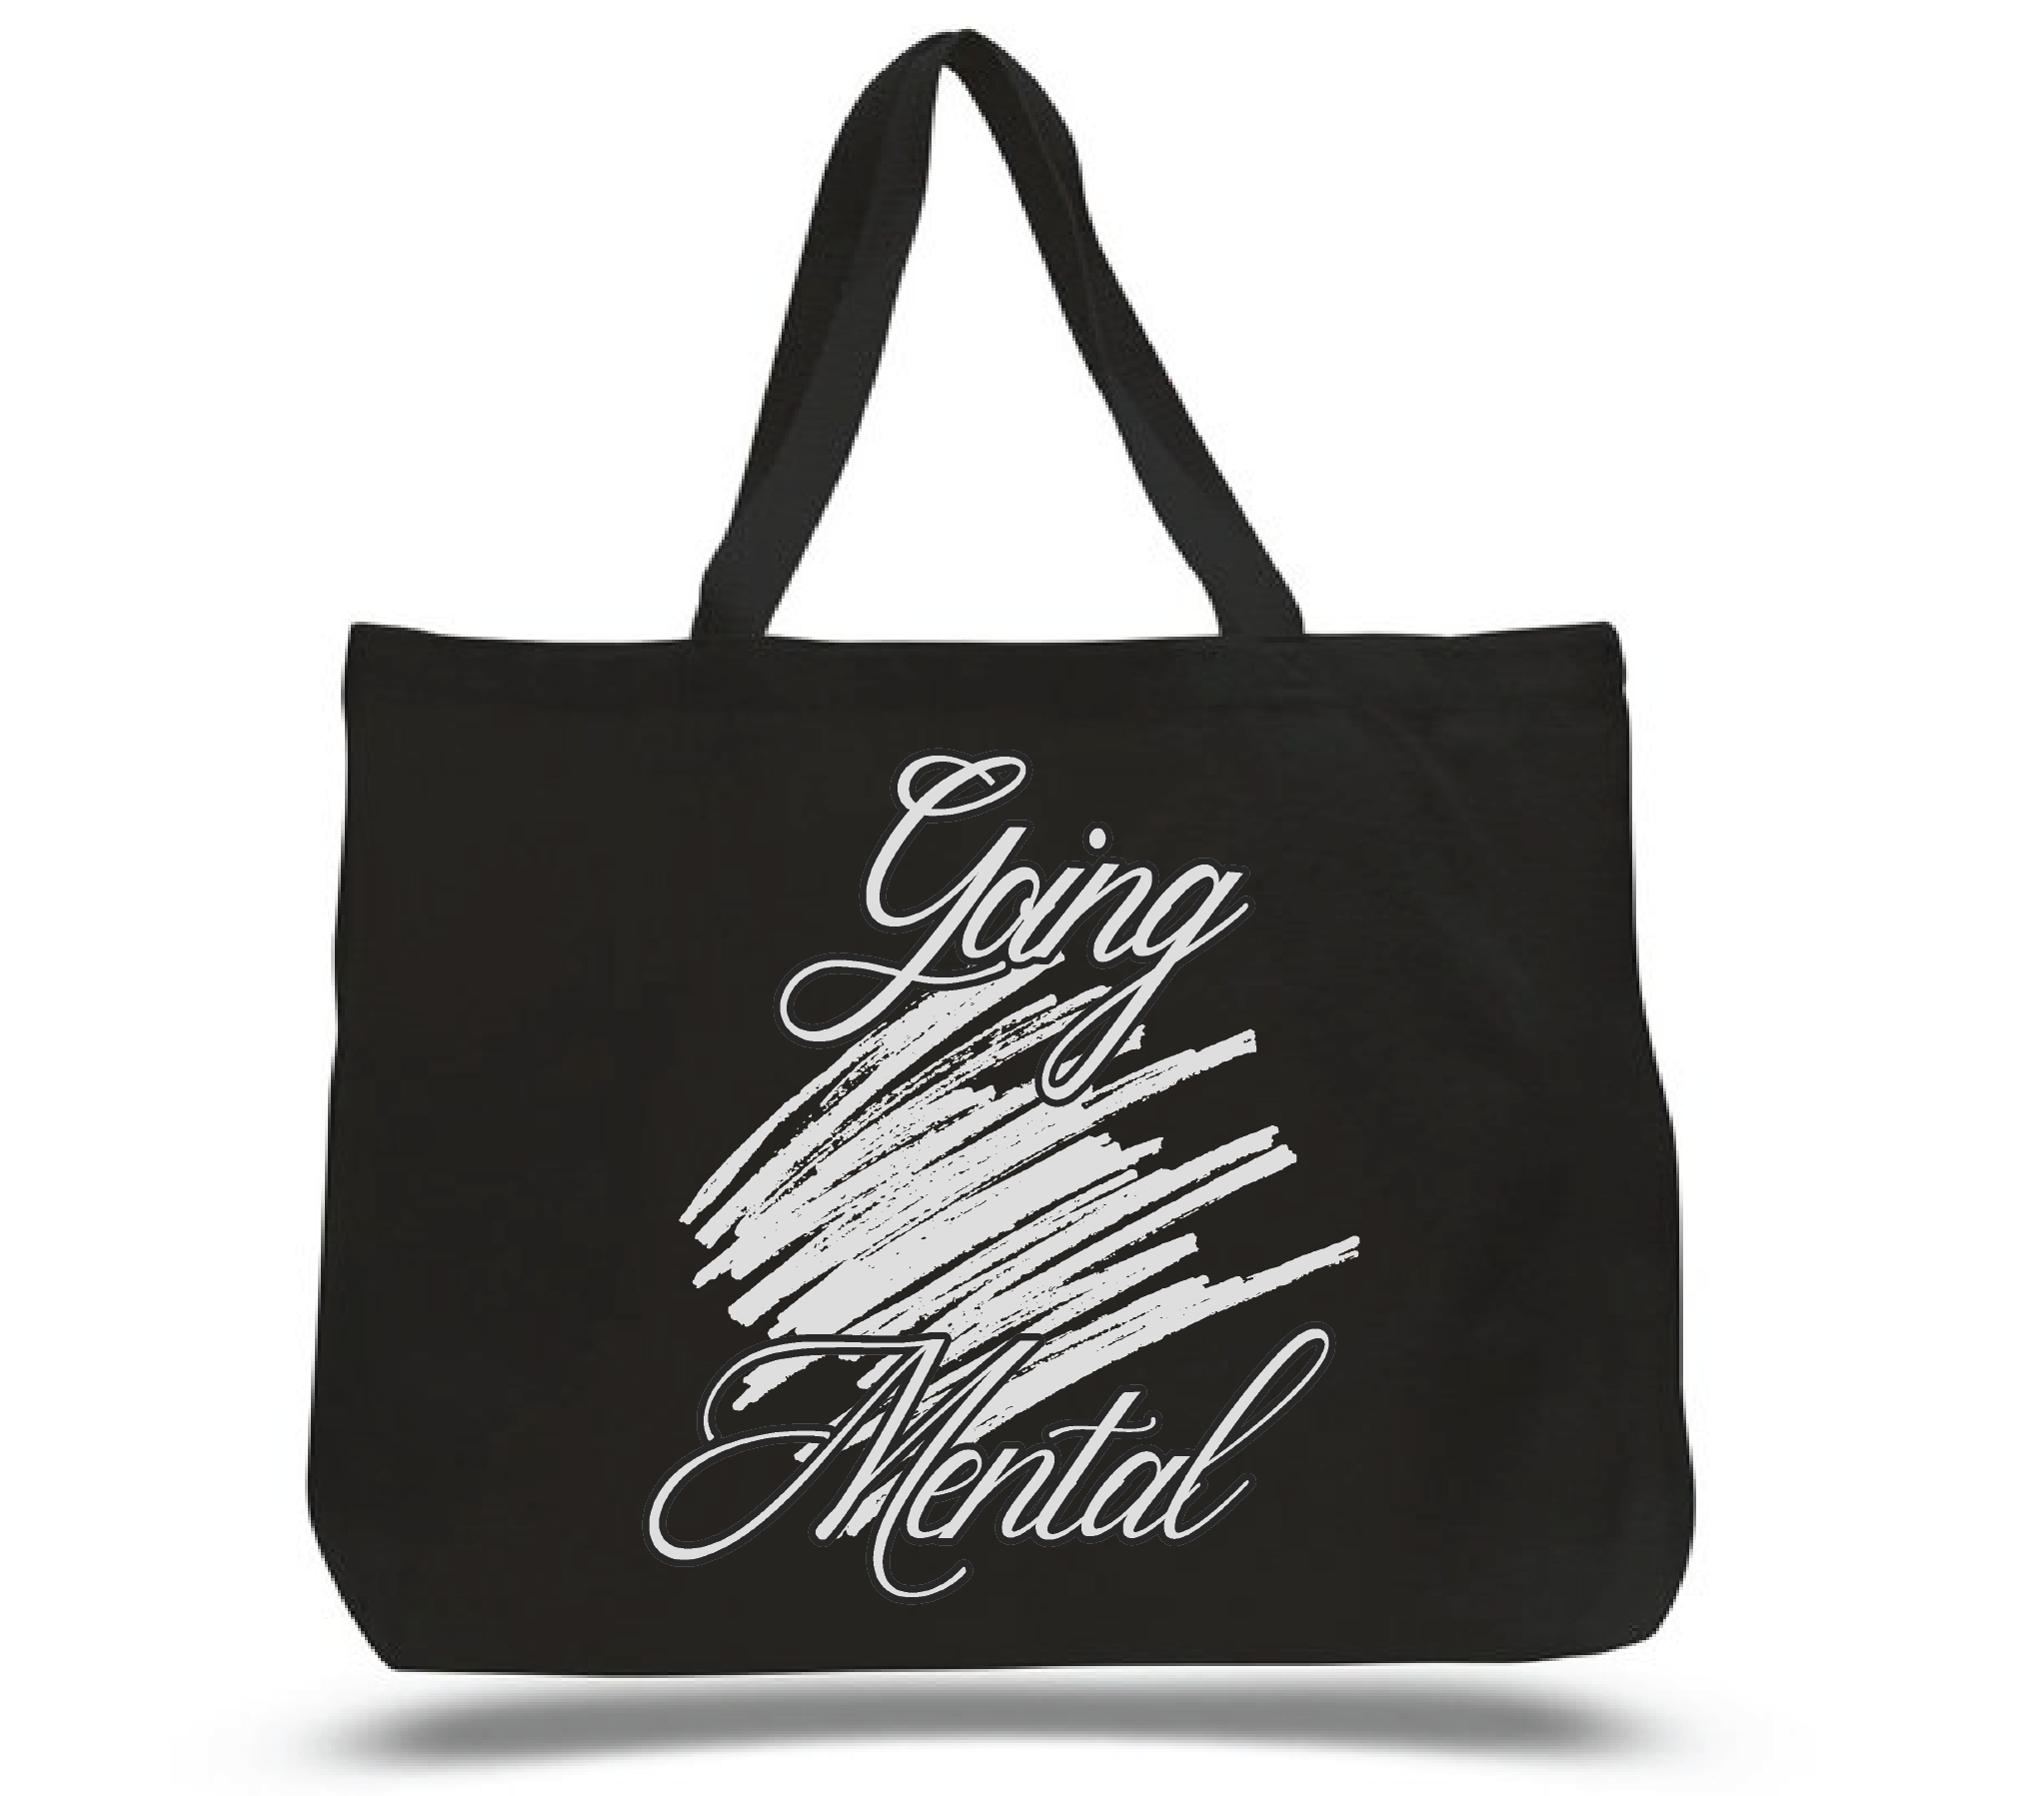 GOING MENTAL TOTE